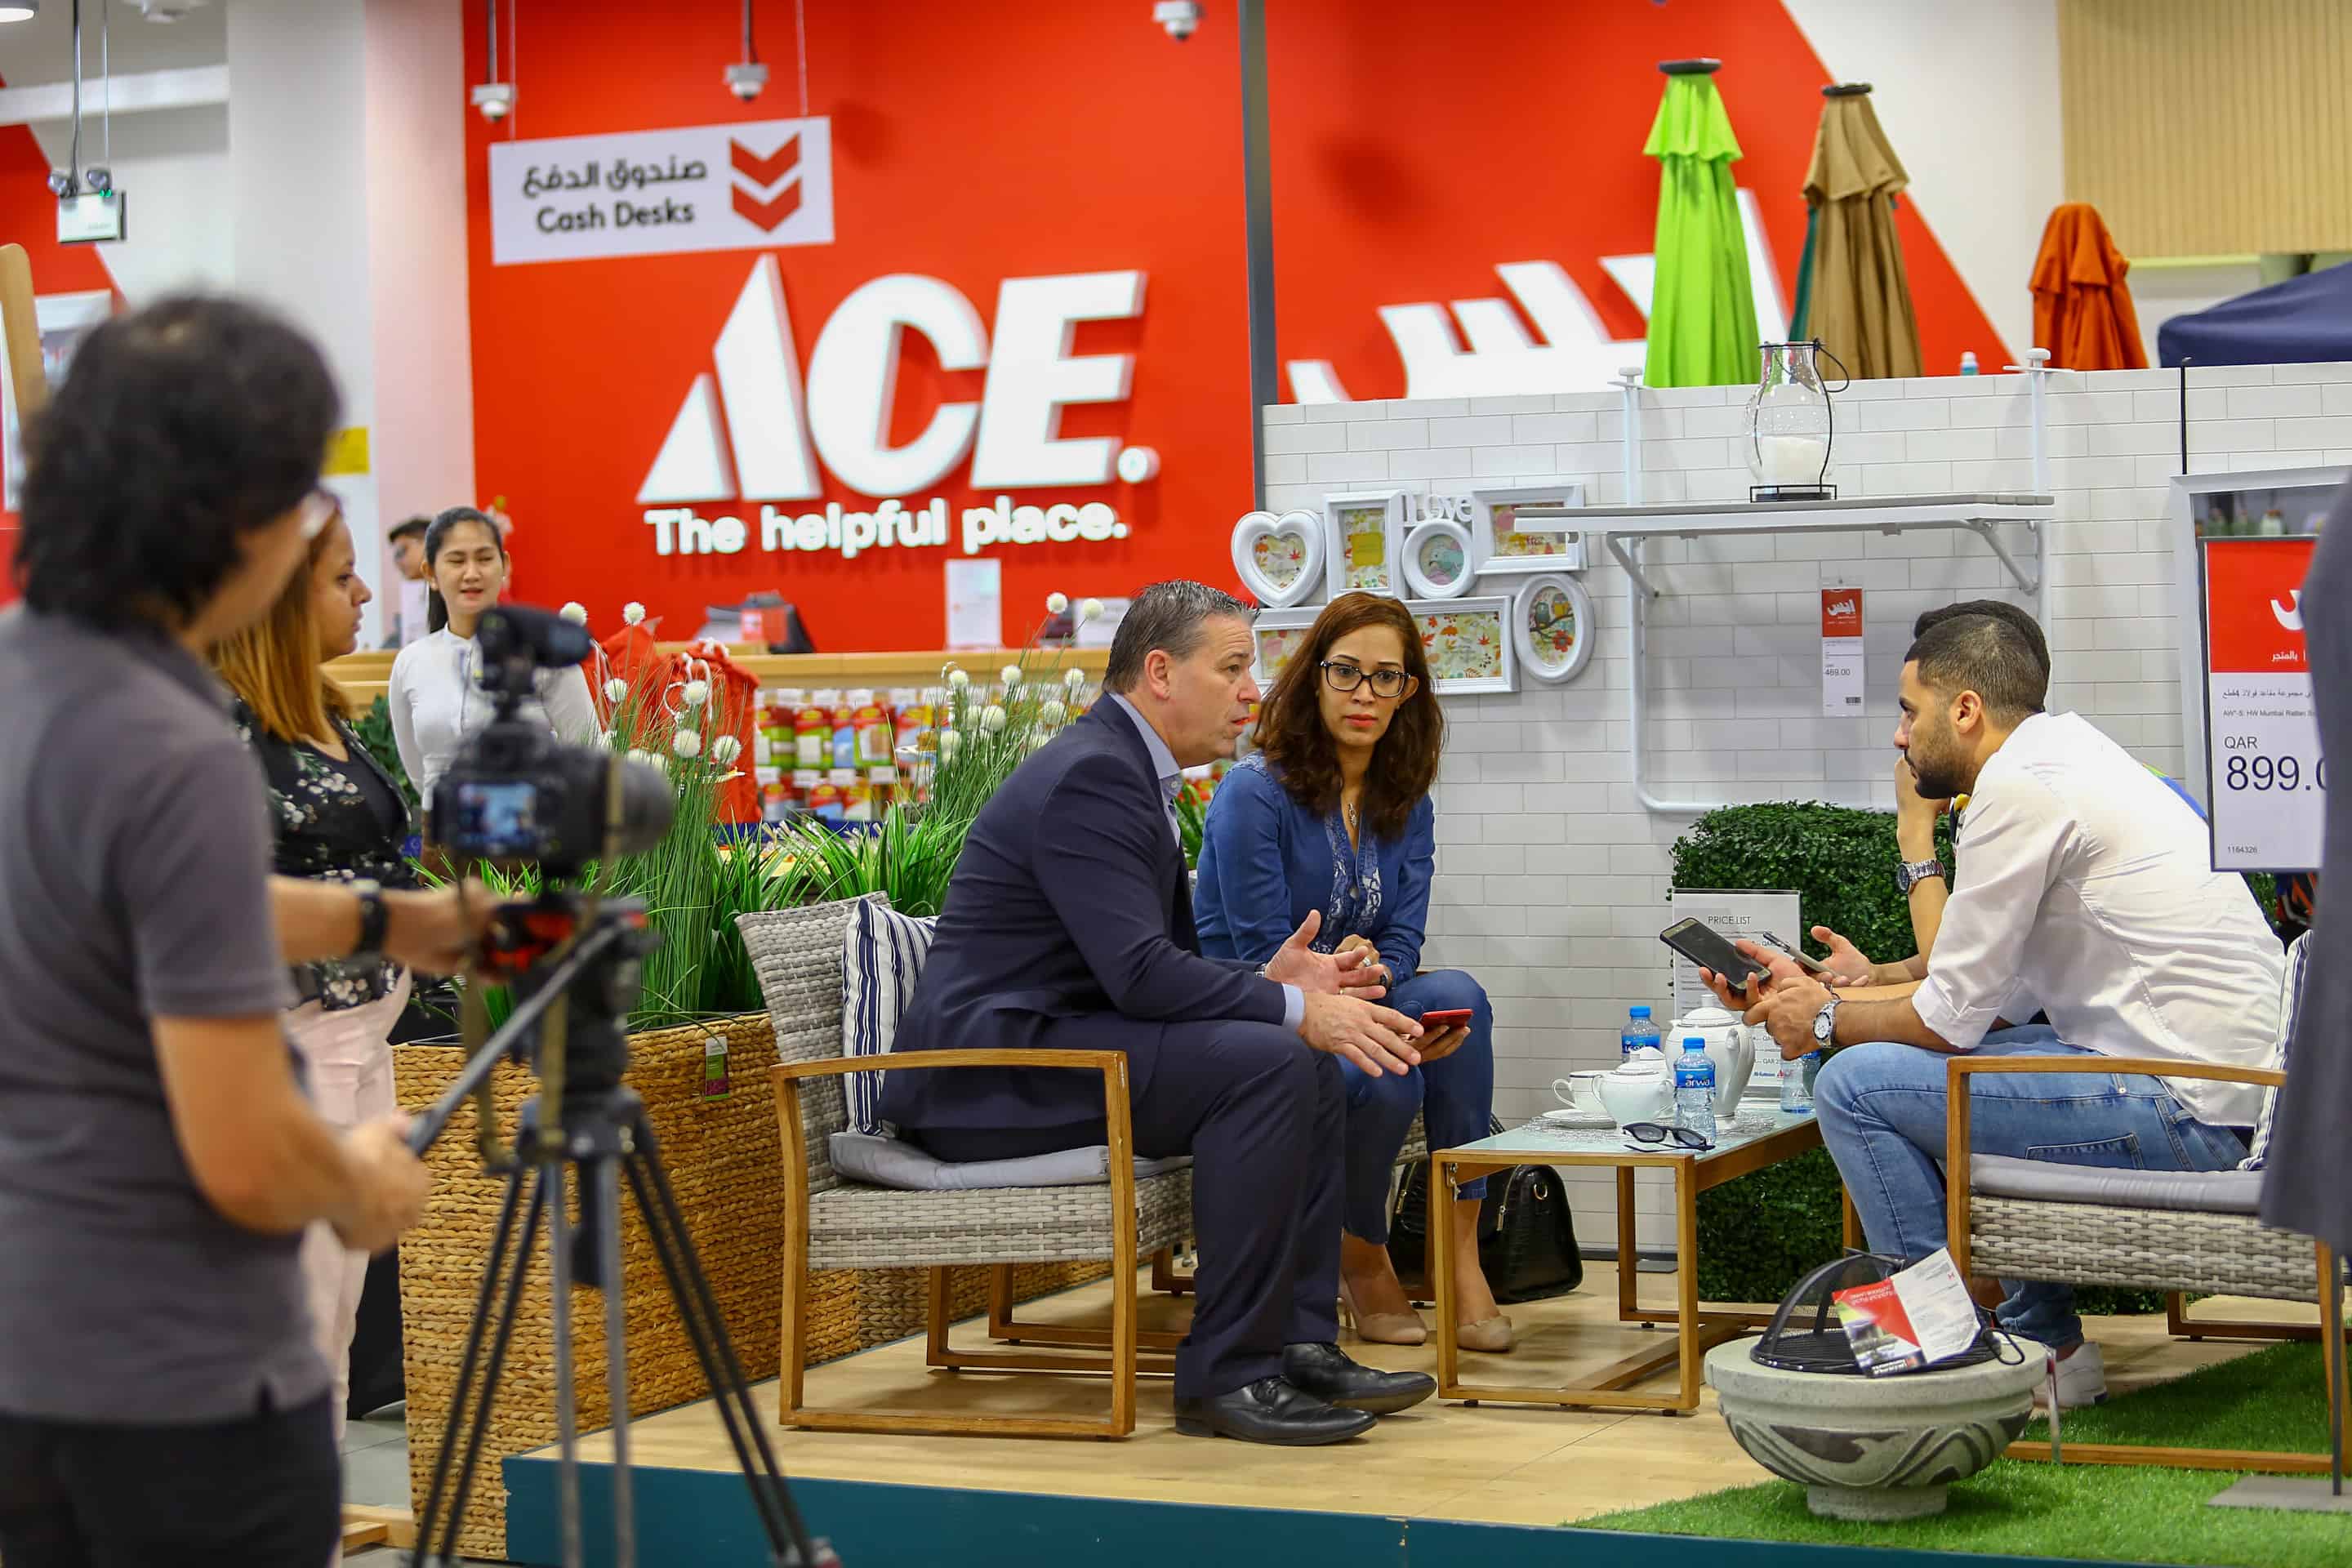 ACE opens its first store in Qatar